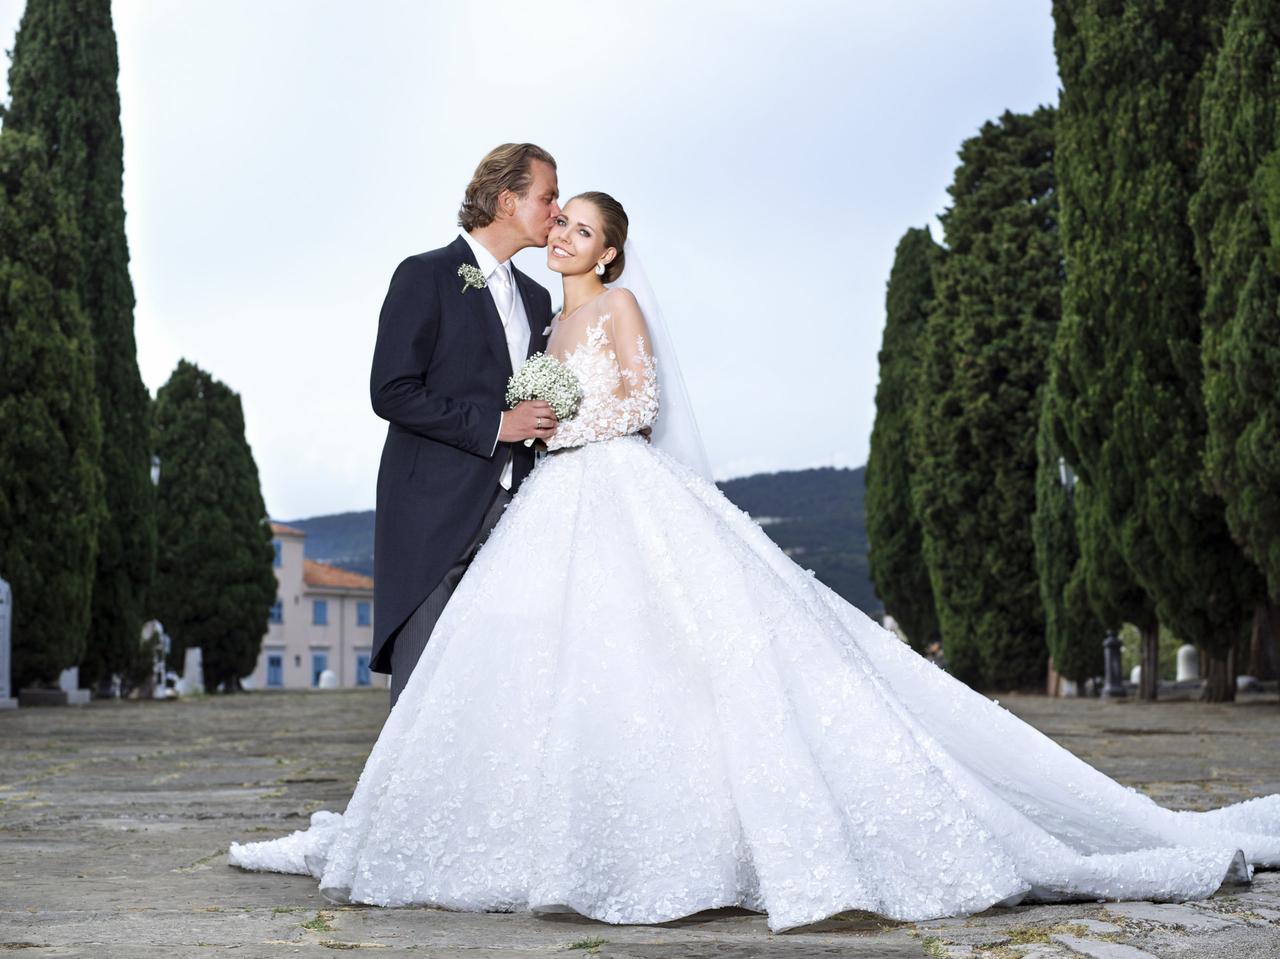 The most expensive wedding dresses of all time